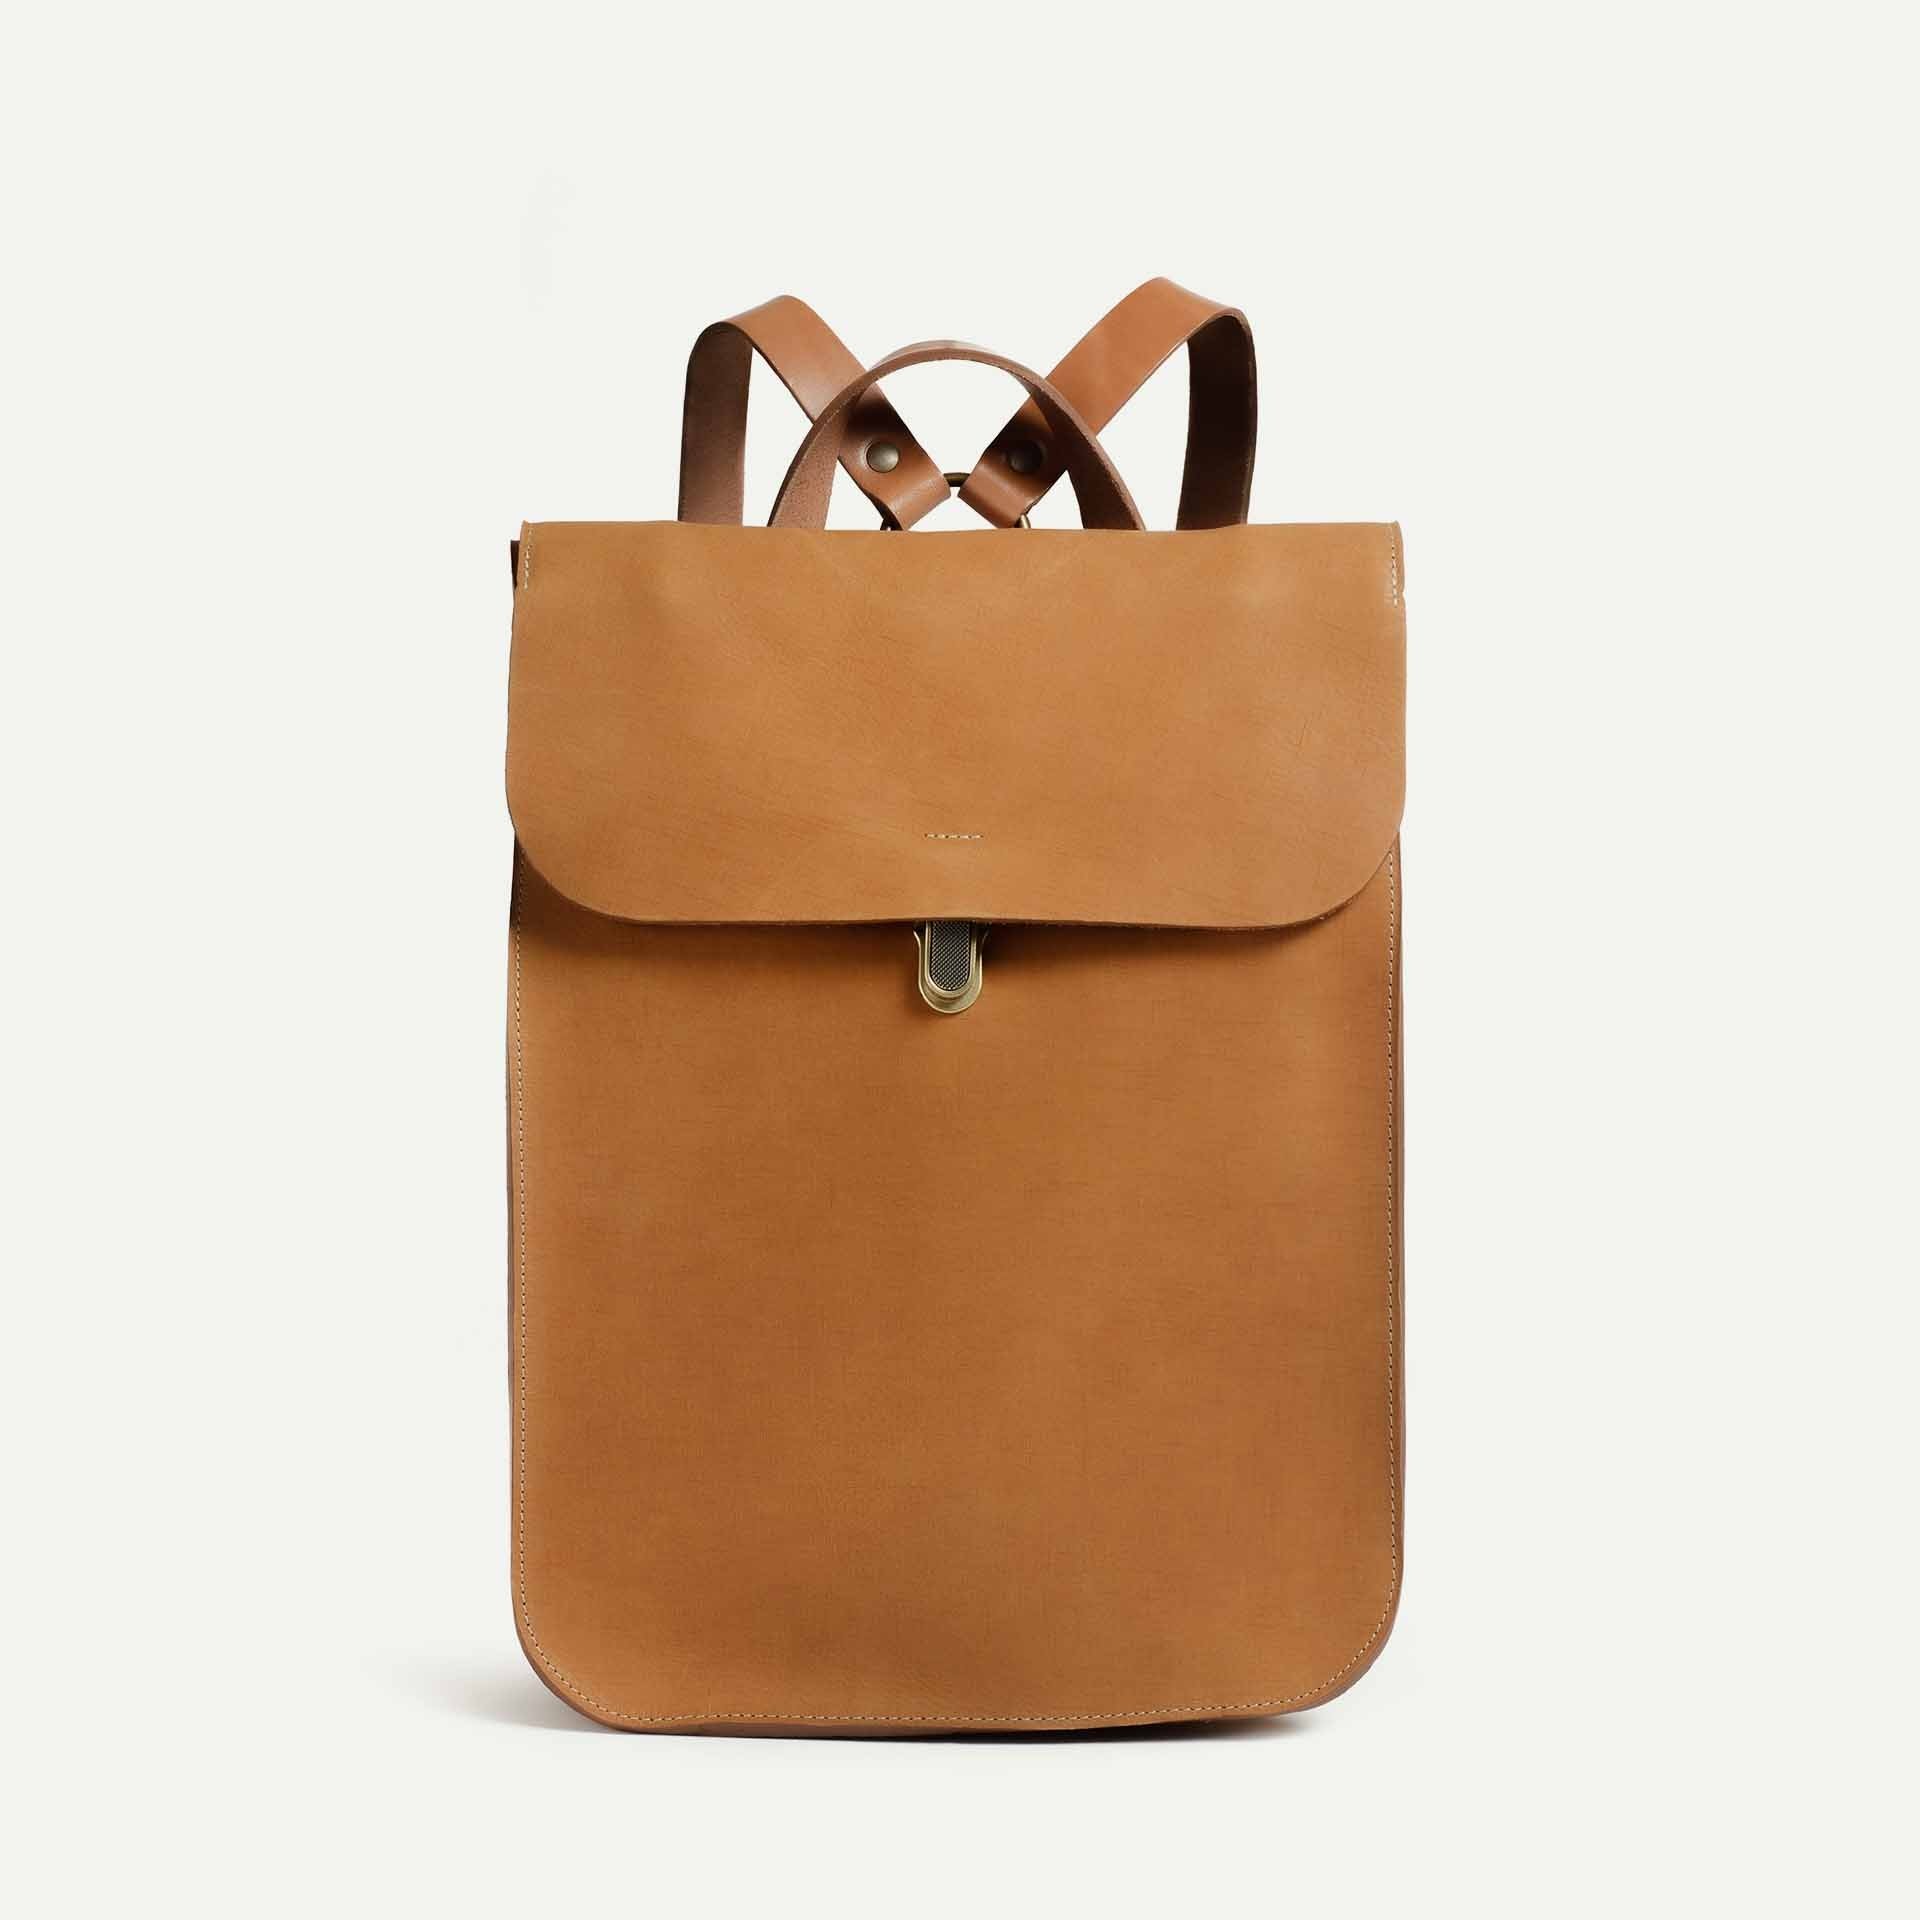 Puncho leather backpack WAX - Honey / Waxed Leather (image n°1)